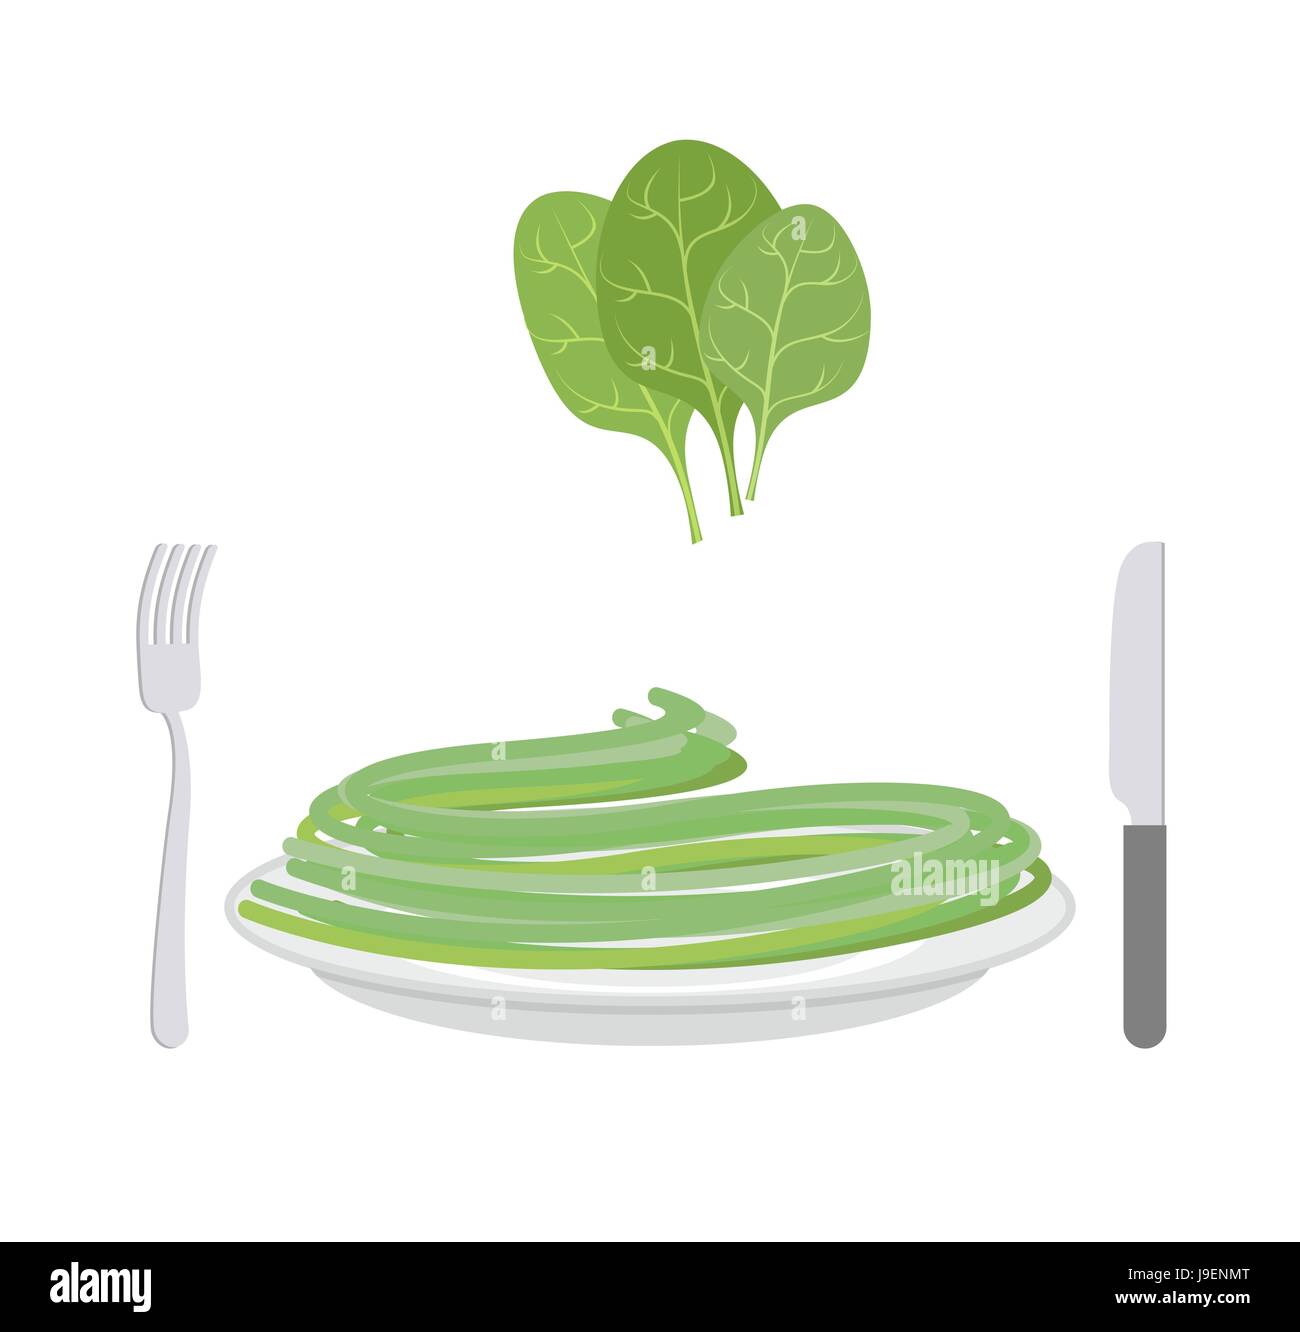 Green pasta with ingredient spinach. Spaghetti on a plate. Vector illustration of delicatessen food Stock Vector